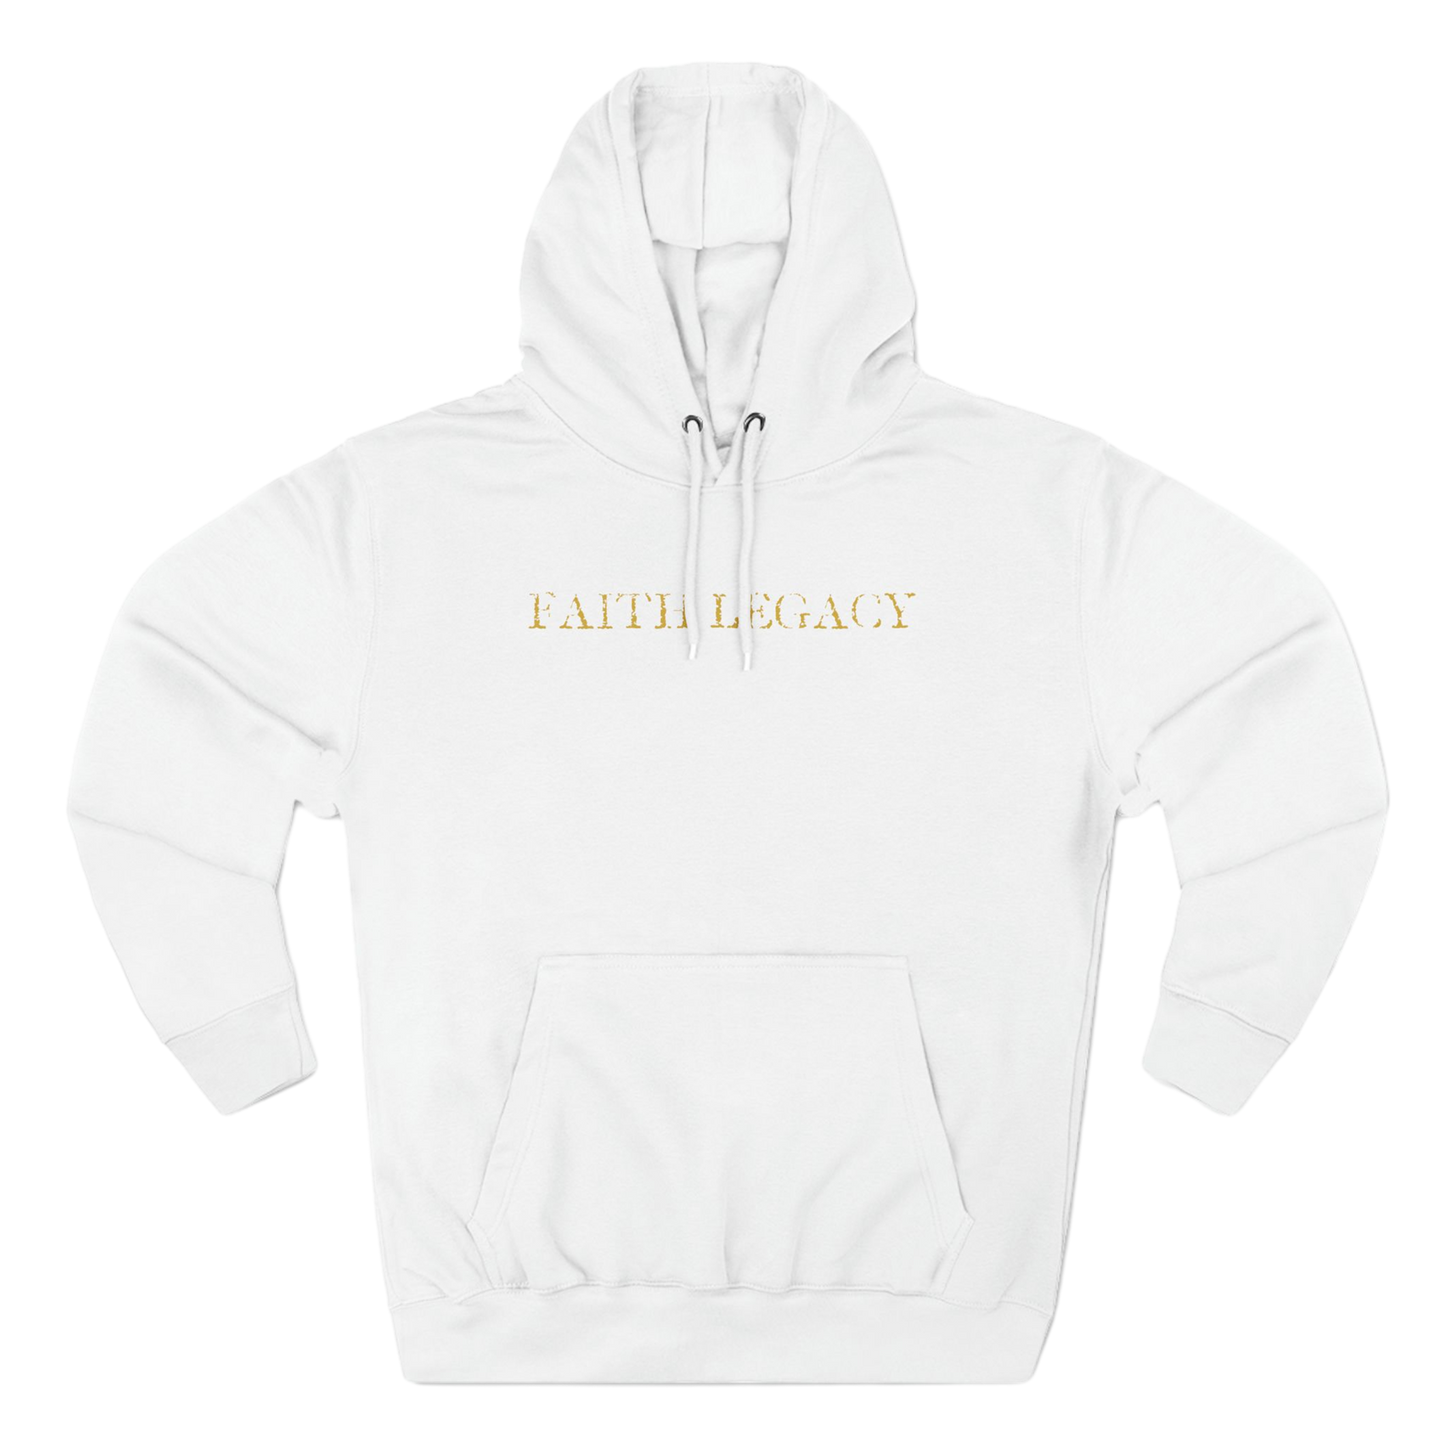 BoundlessFaith - To Live is Christ, To Die is Gain - Christian Apparel Hoodie WHITE - TRUE Apparel of God